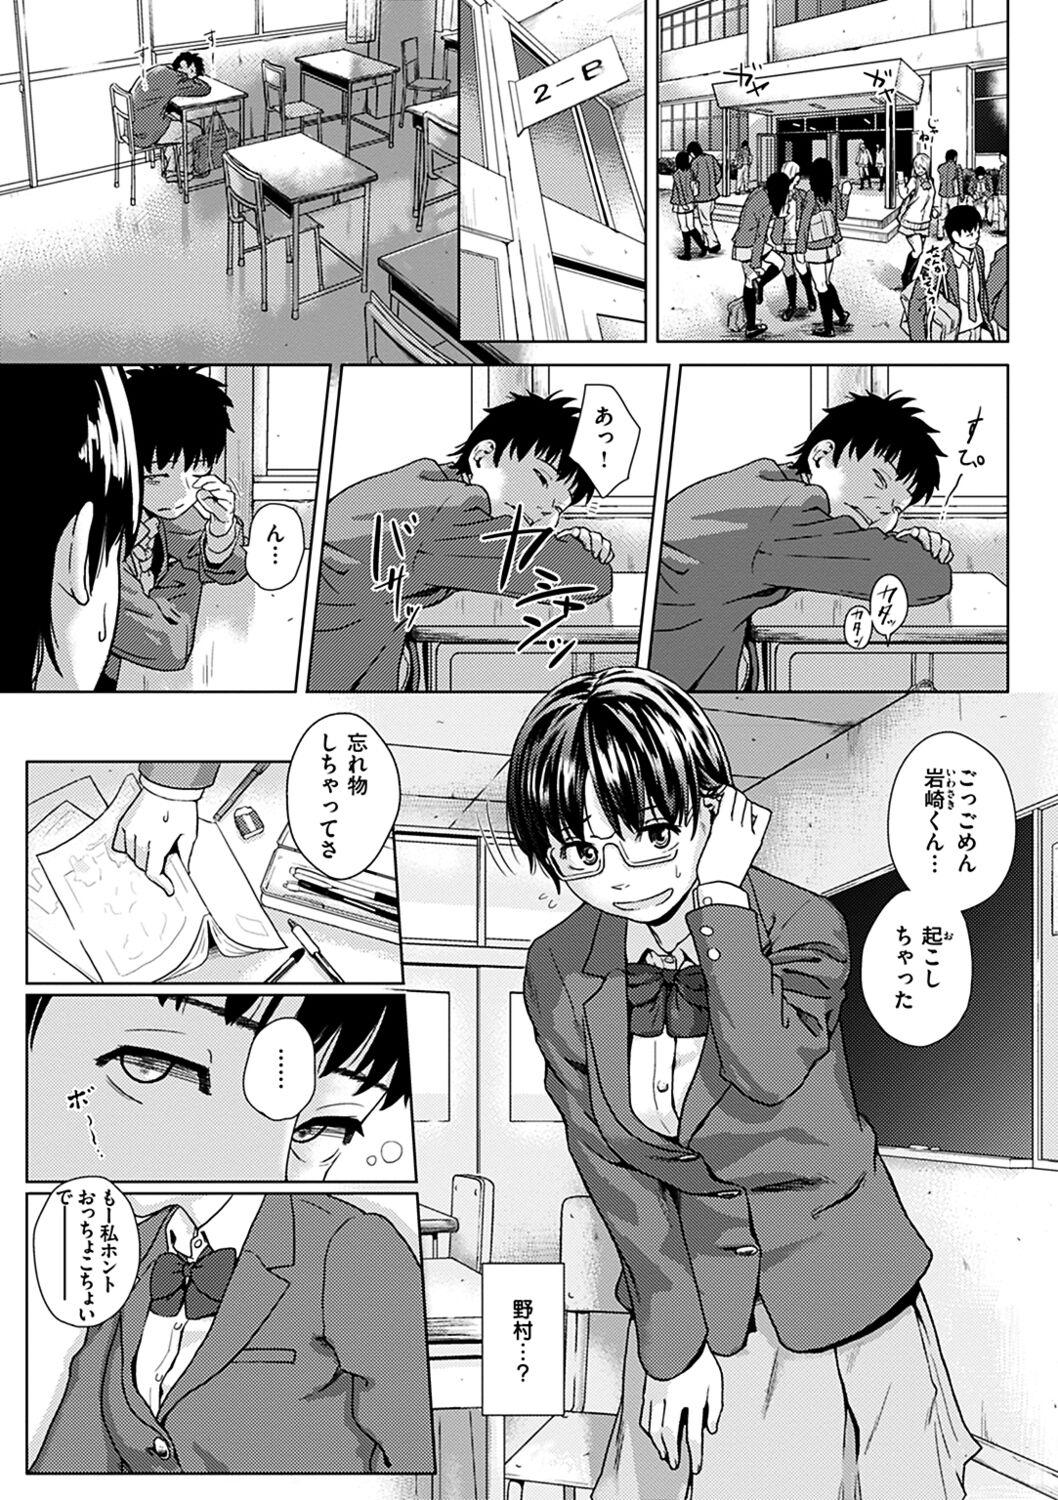 Speculum Kimi dake ni - I Only Love You... Ginger - Page 9